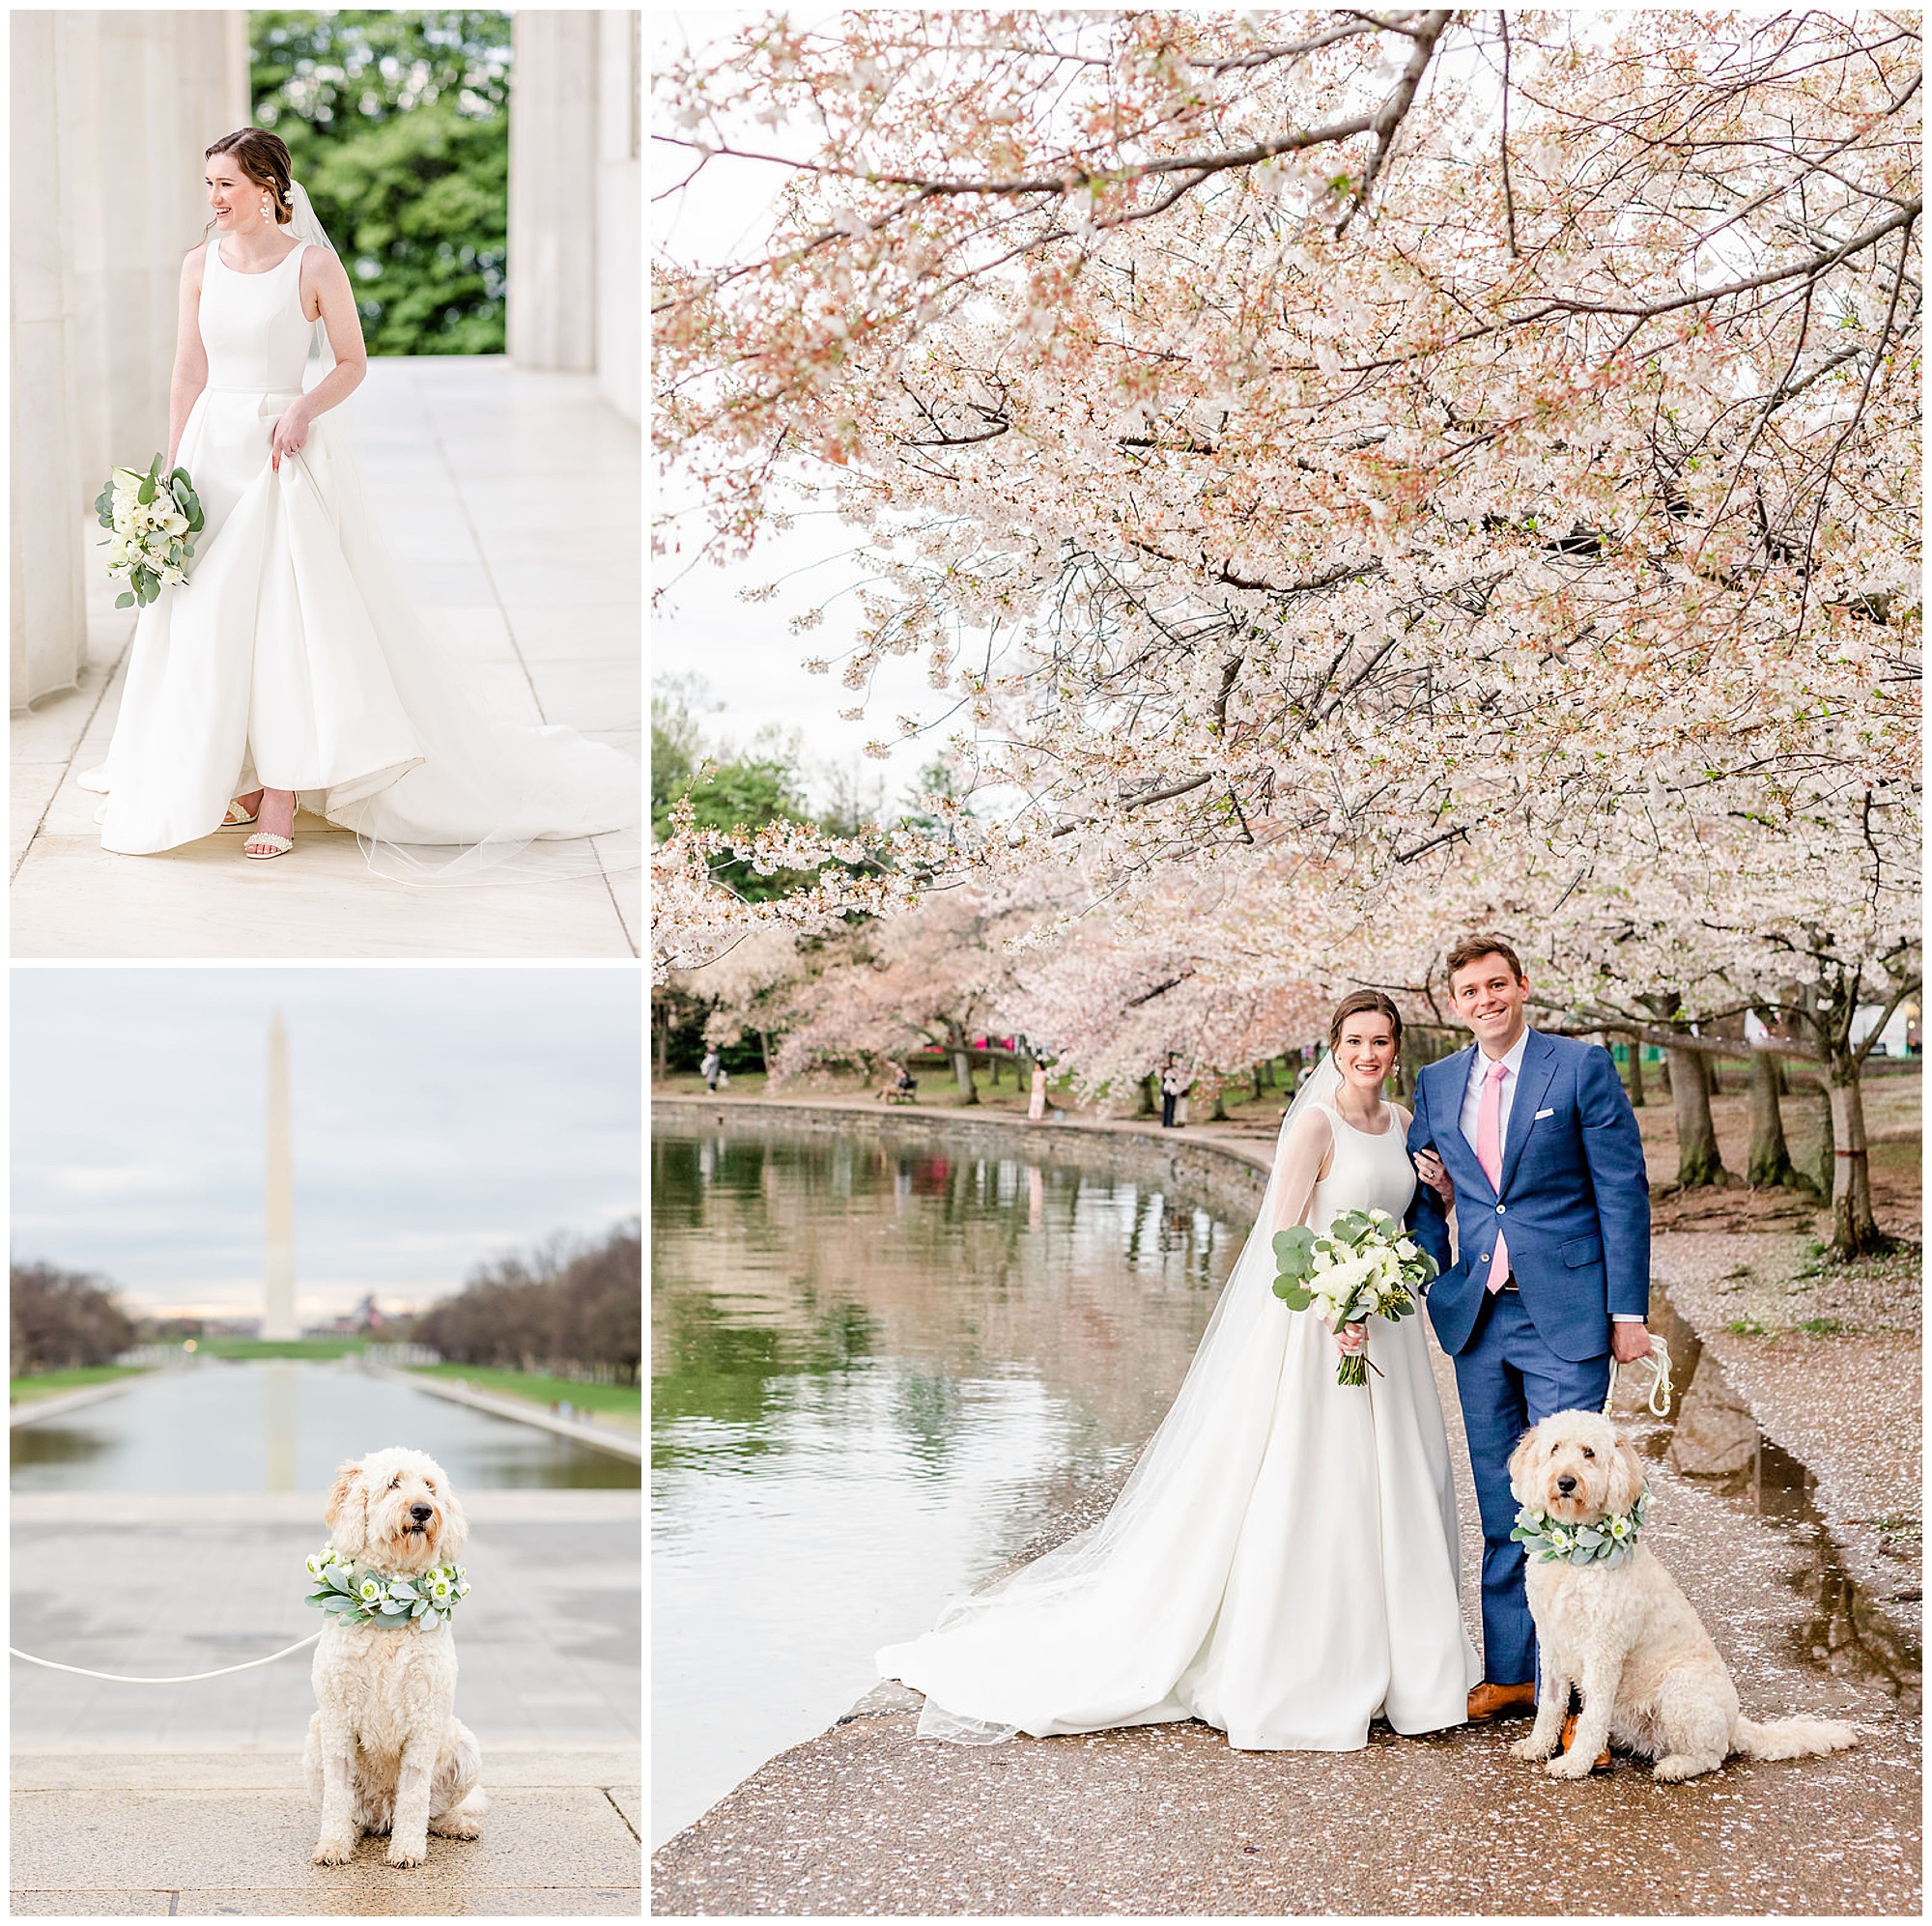 best of 2022 elopements and micro-weddings, best of weddings, best of 2022, DC wedding photographer, DC micro-wedding photographer, DC elopement photographer, Alexandria elopement photographer, Old Town elopement photographer, Rachel E.H. Photography, couple smiling with dog, pale pink cherry blossoms, dog in front of reflecting pool